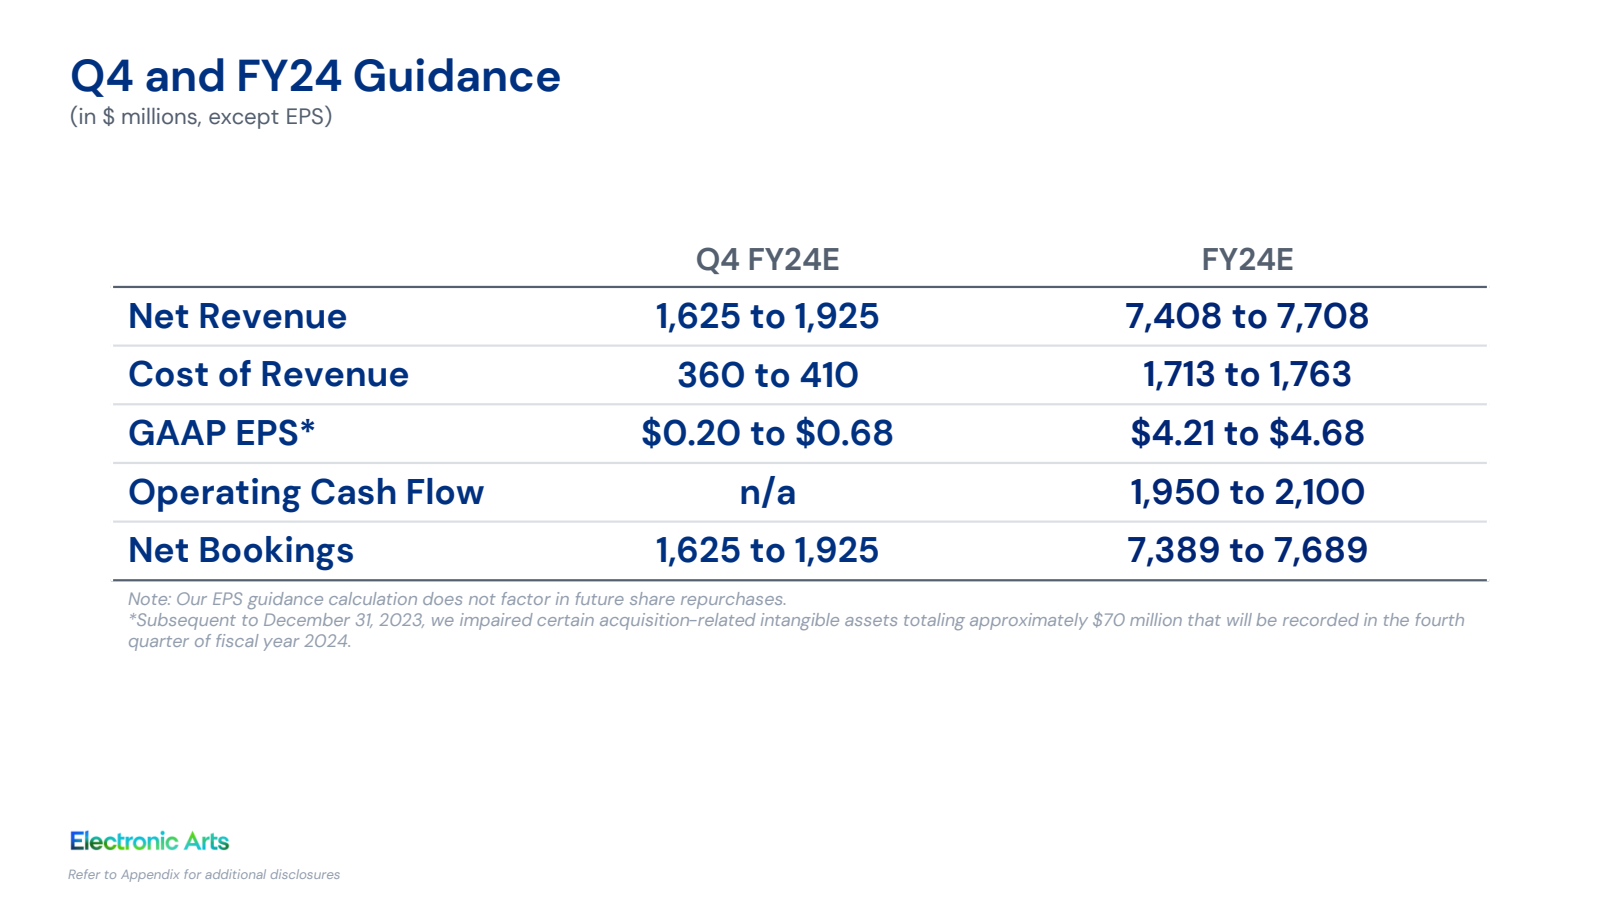 Q4 and FY24 Guidance